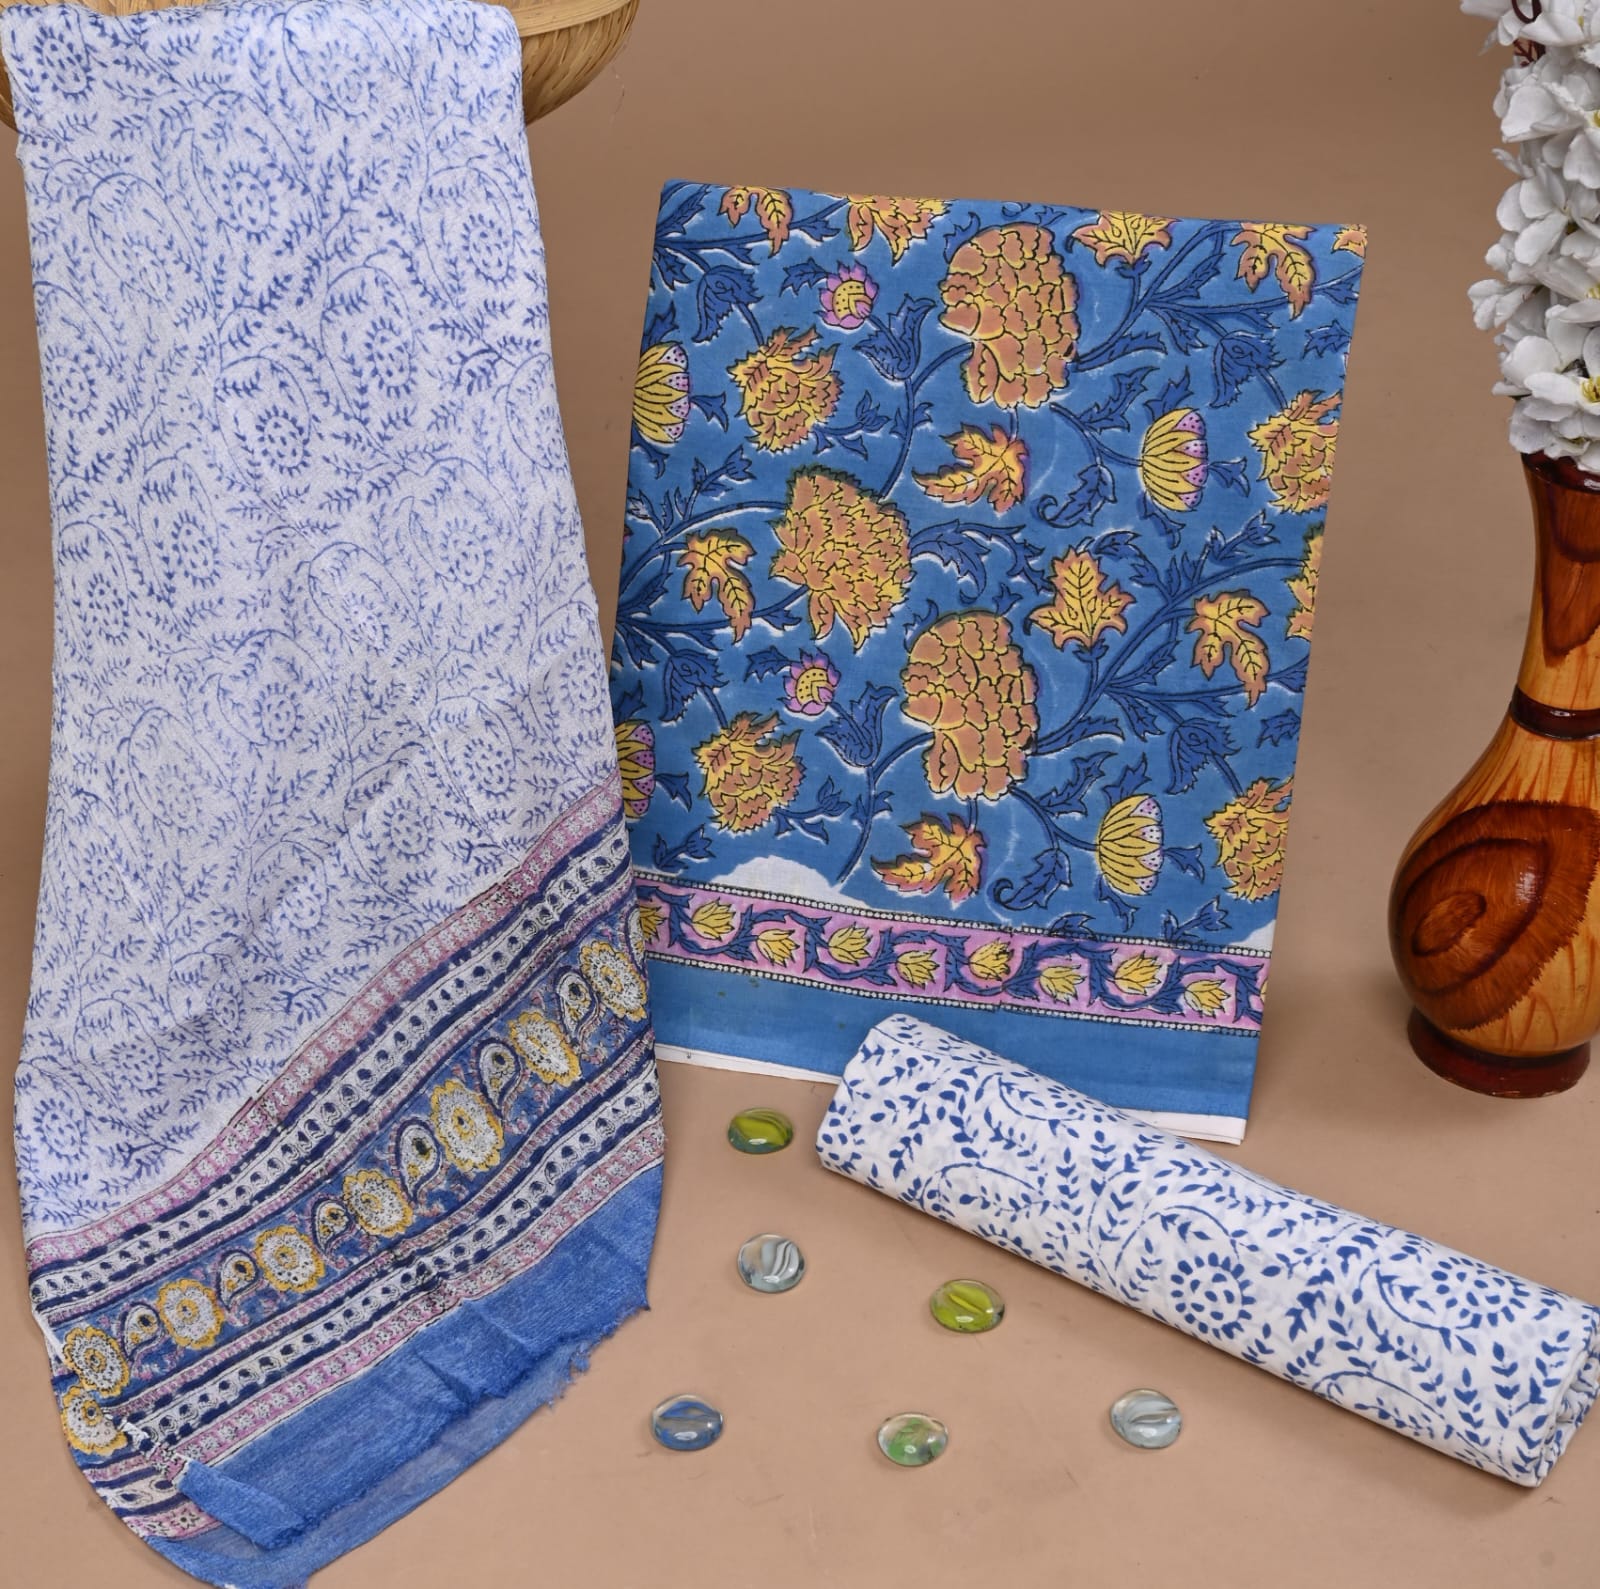 Blue and white new floral print chiffon dupatta suit